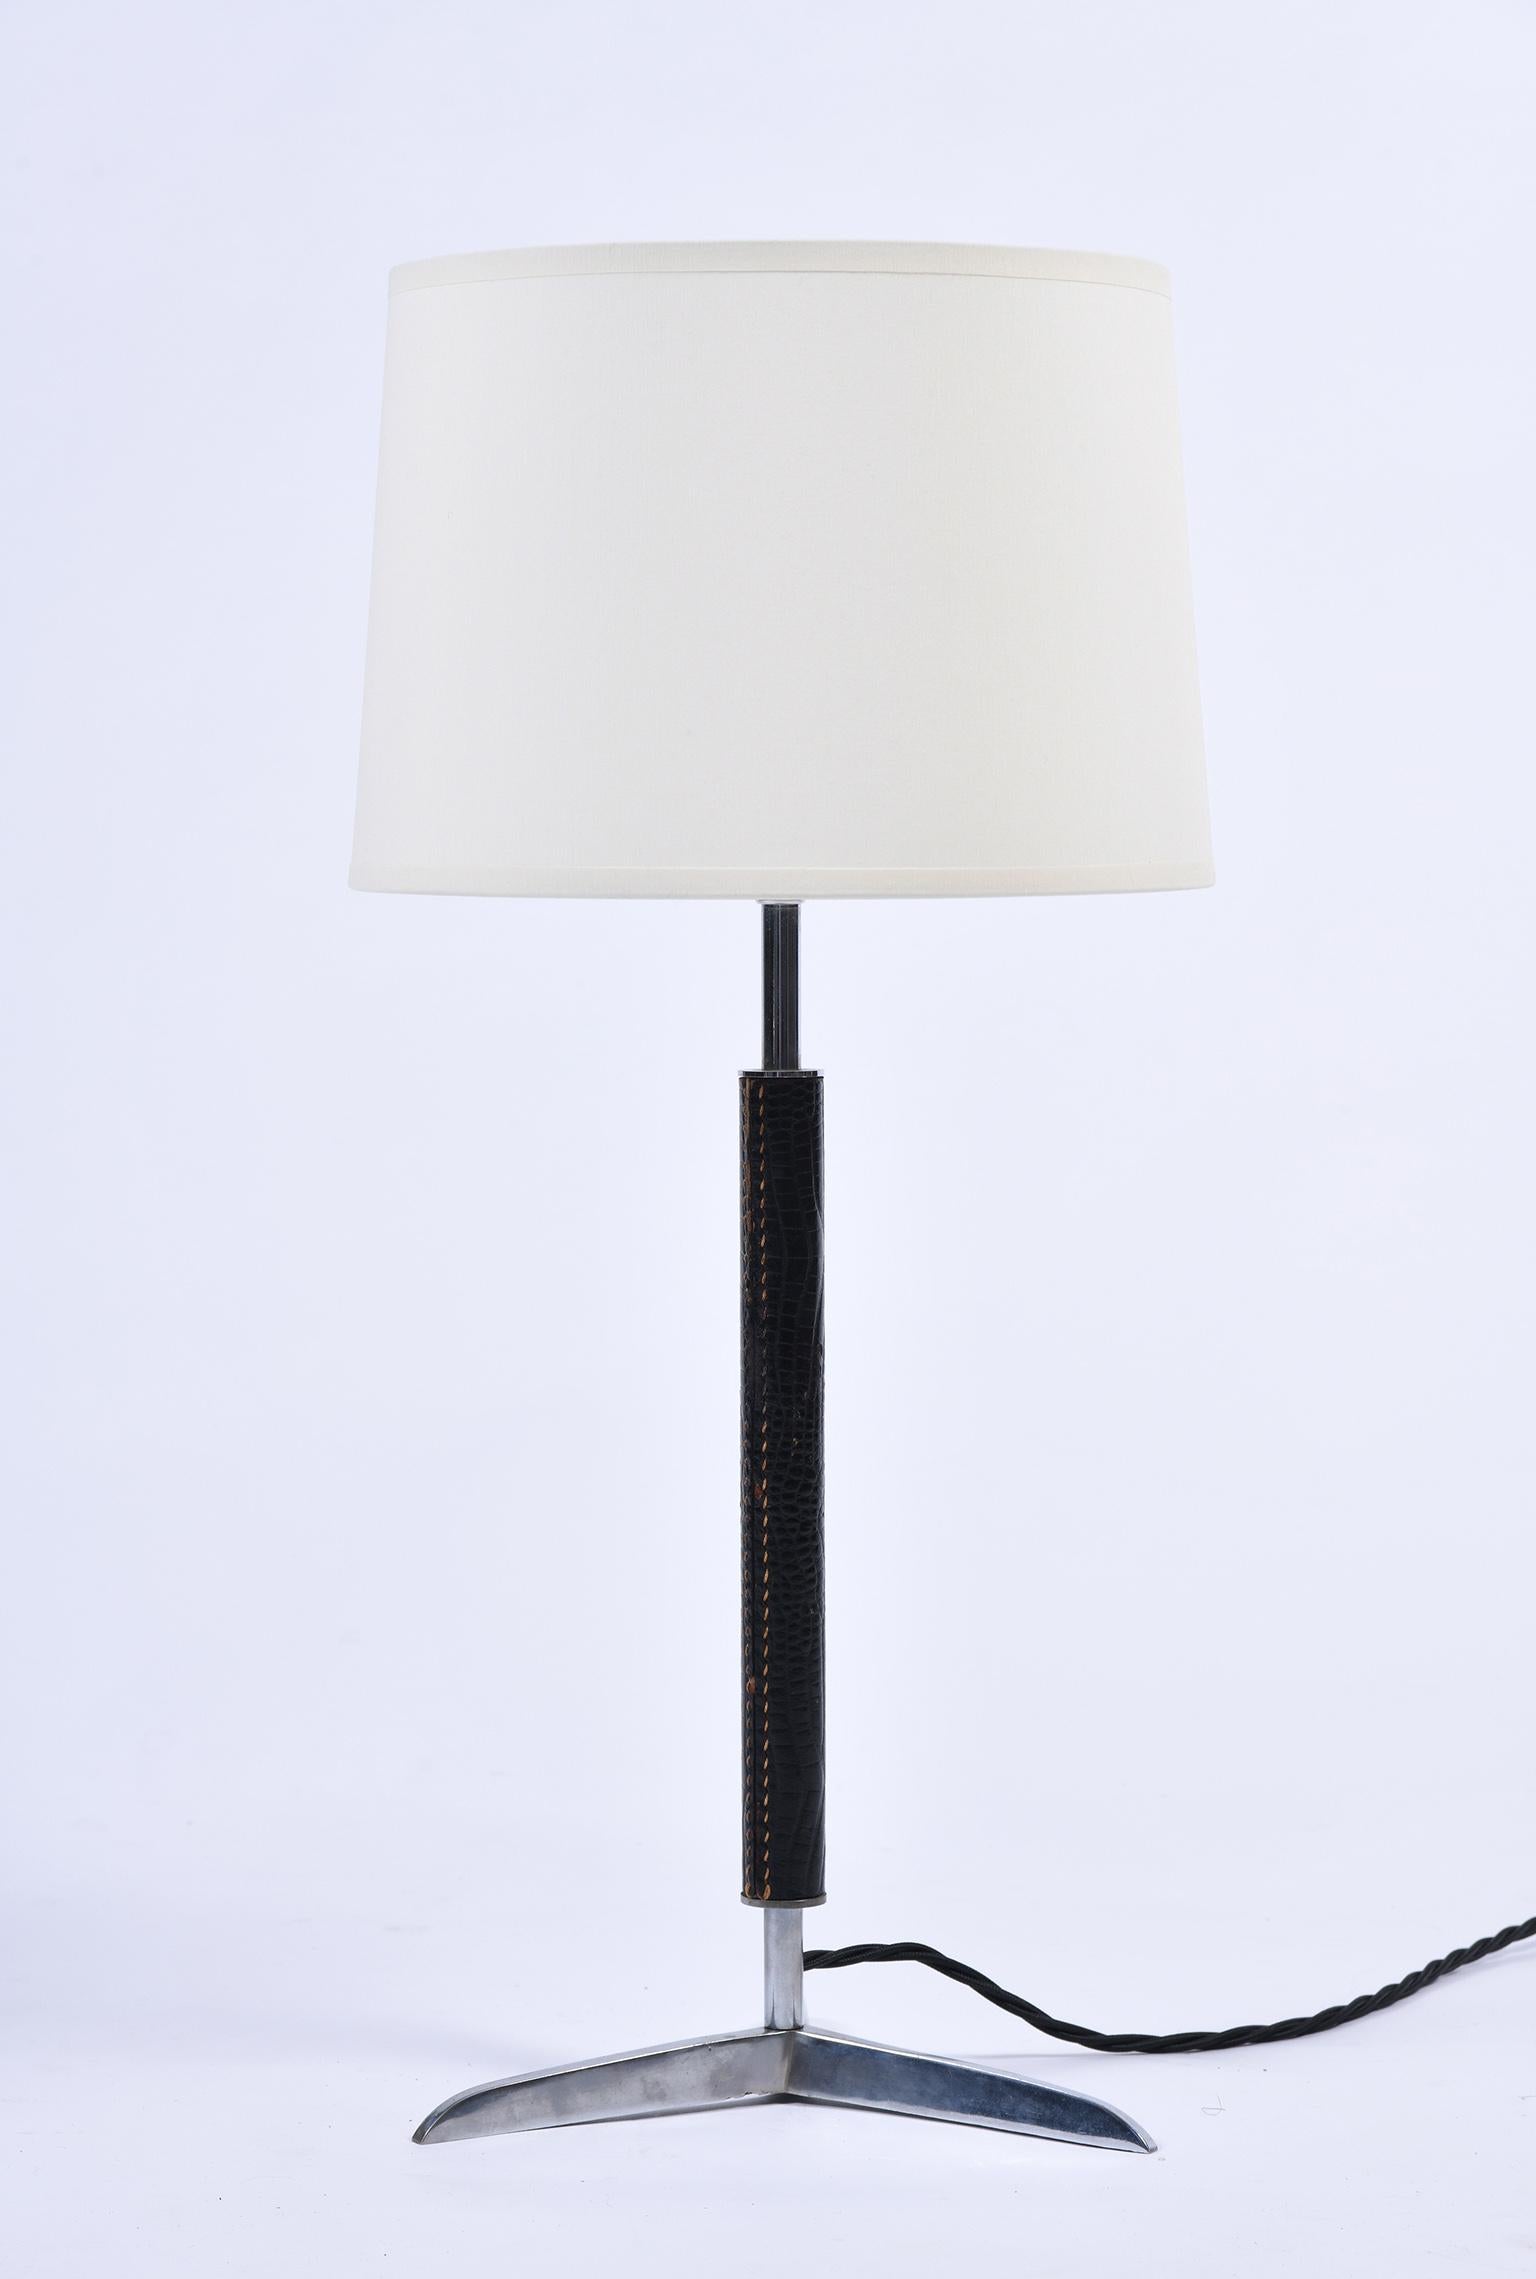 A stitched black leather and nickel-plated brass tripod table lamp
France, circa 1955.